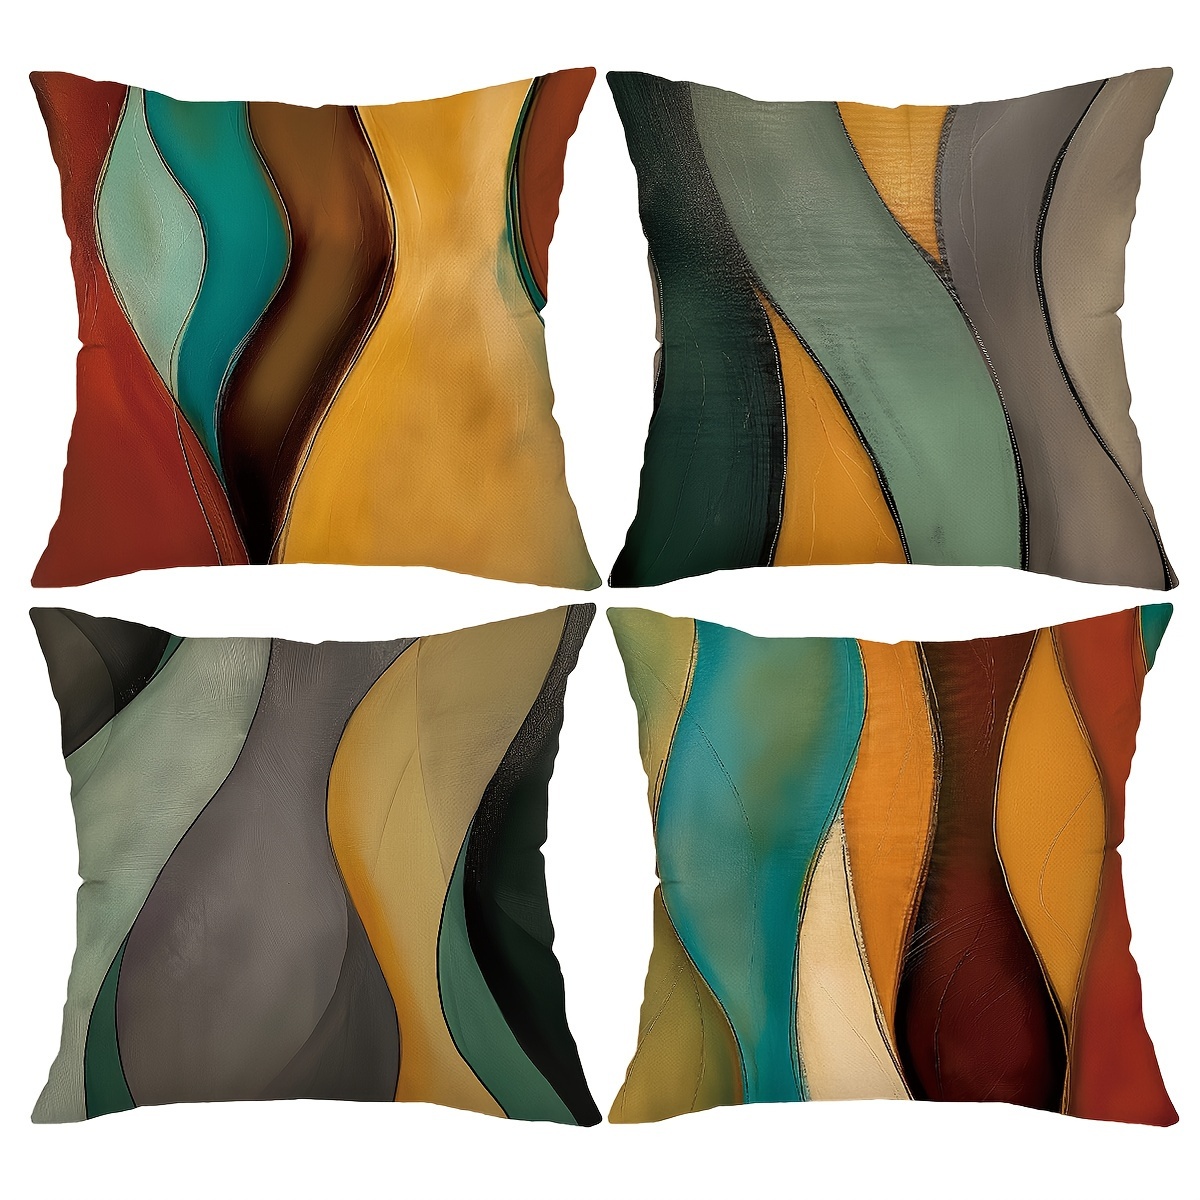 

4-piece Boho Geometric Waves Throw Pillow Covers Set - 18x18 Inch, Linen Blend, Zip Closure - Perfect For Living Room, Patio, And Bedroom Decor - Hand Wash Only, No Insert Included